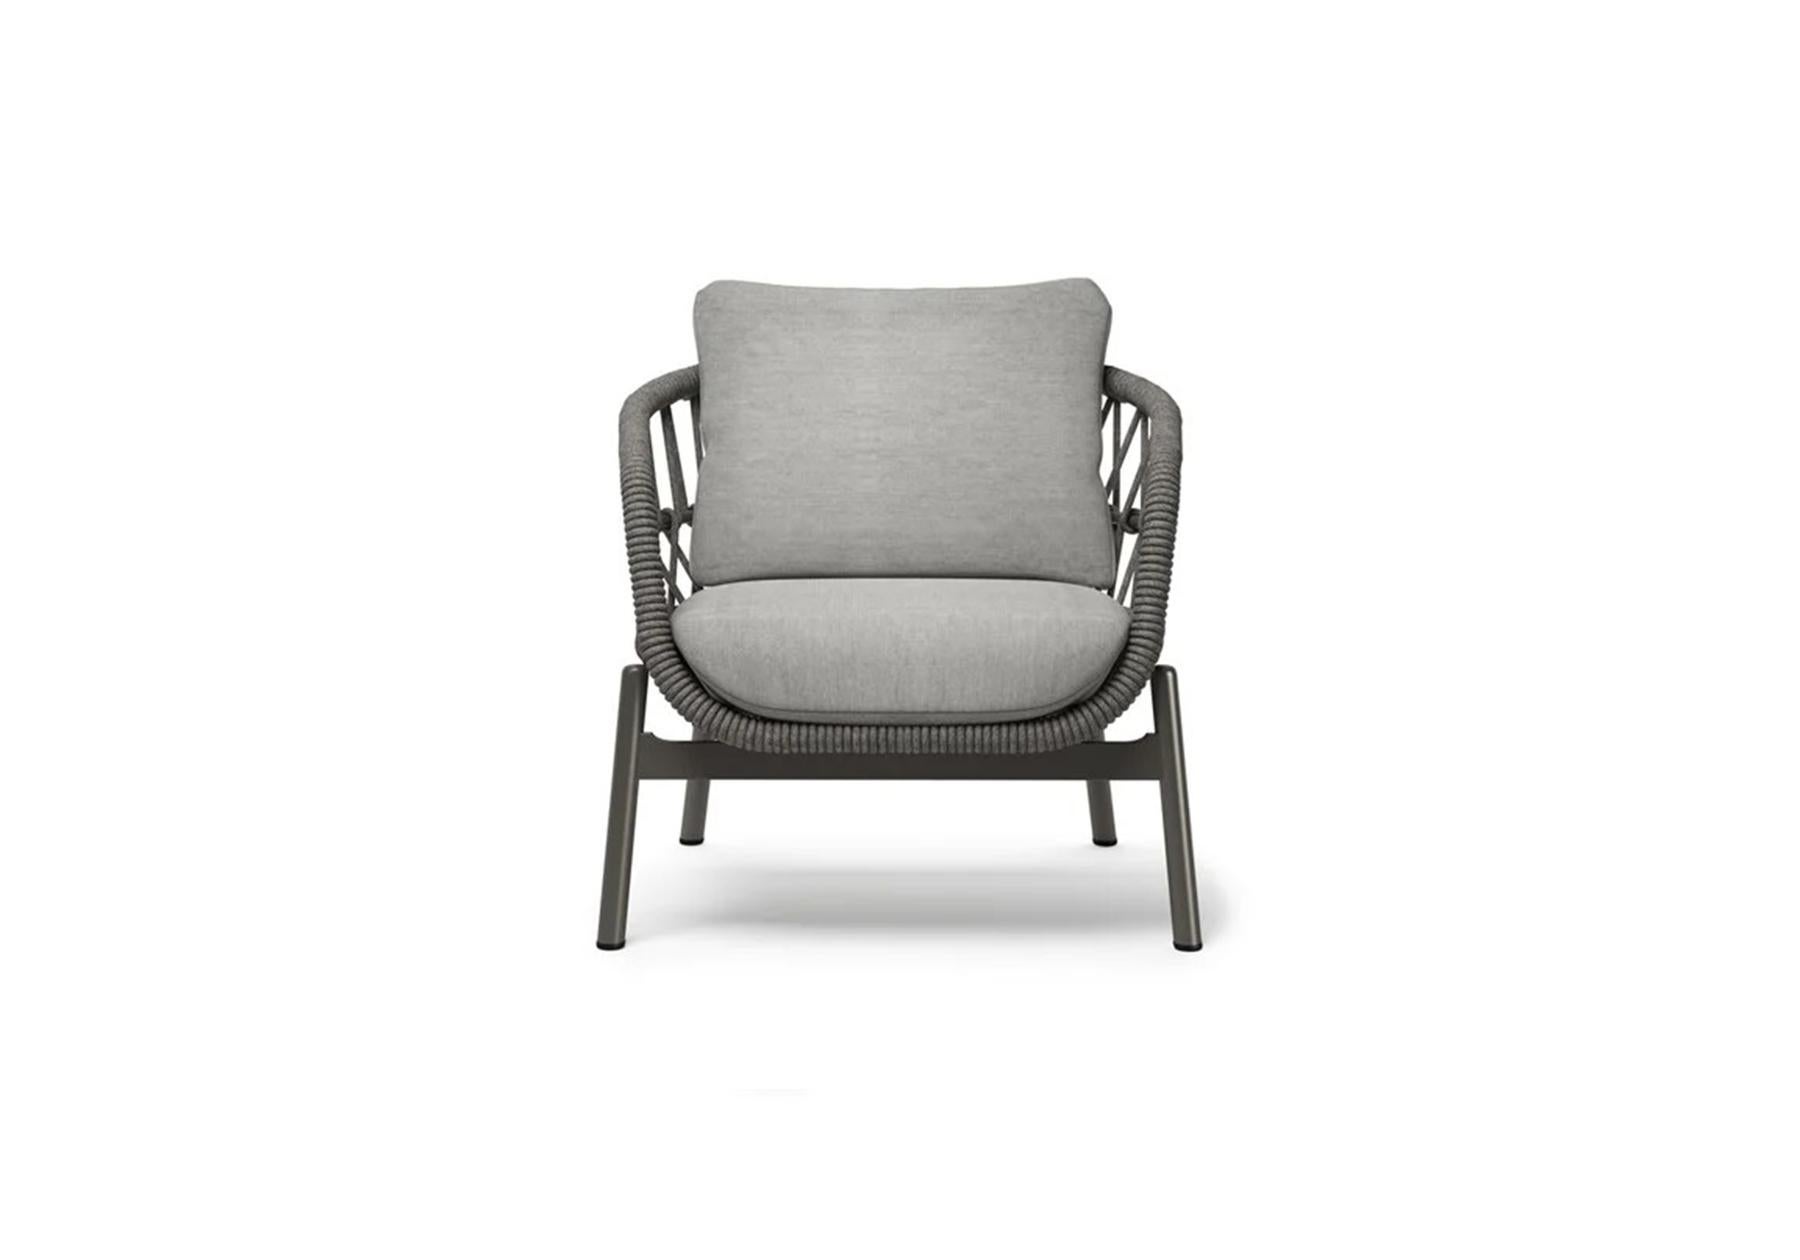 Gemma is a rope and aluminium garden armchair.‎

The Gemma Collection is a powerful sketch, synthesizes its rounded lines and comfort, it incorporates the power of contrast into the entire design and deepens the open space experience.‎ The